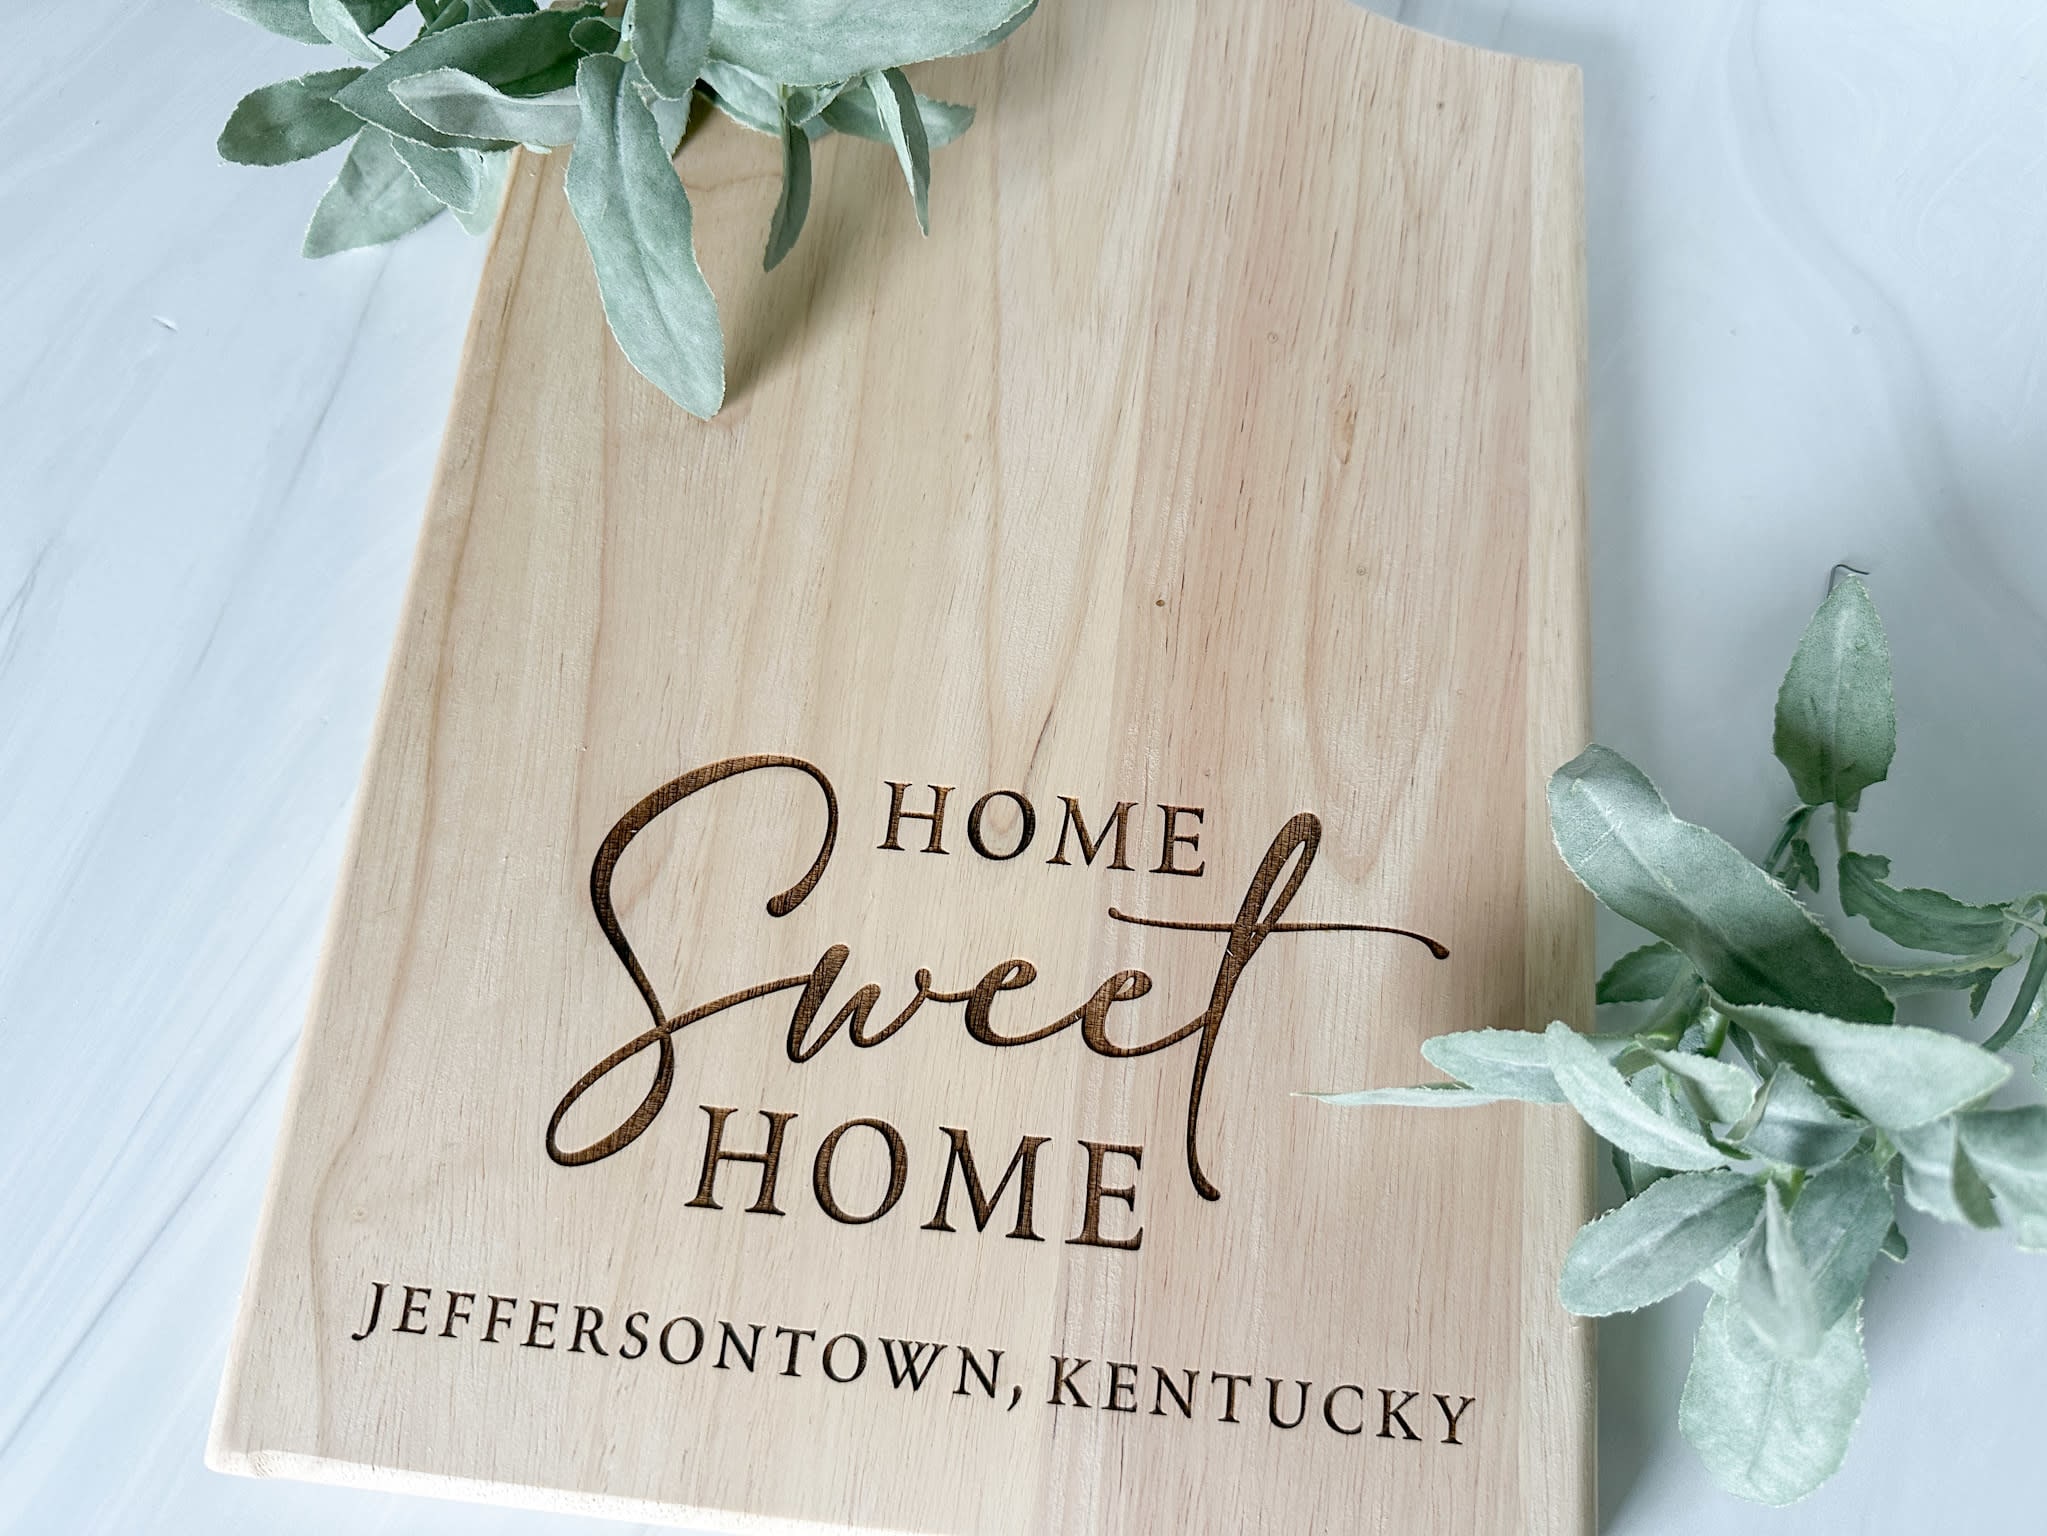 light oak cutting board with Home Sweet Home and Jeffersontown, Kentucky engraved onto it